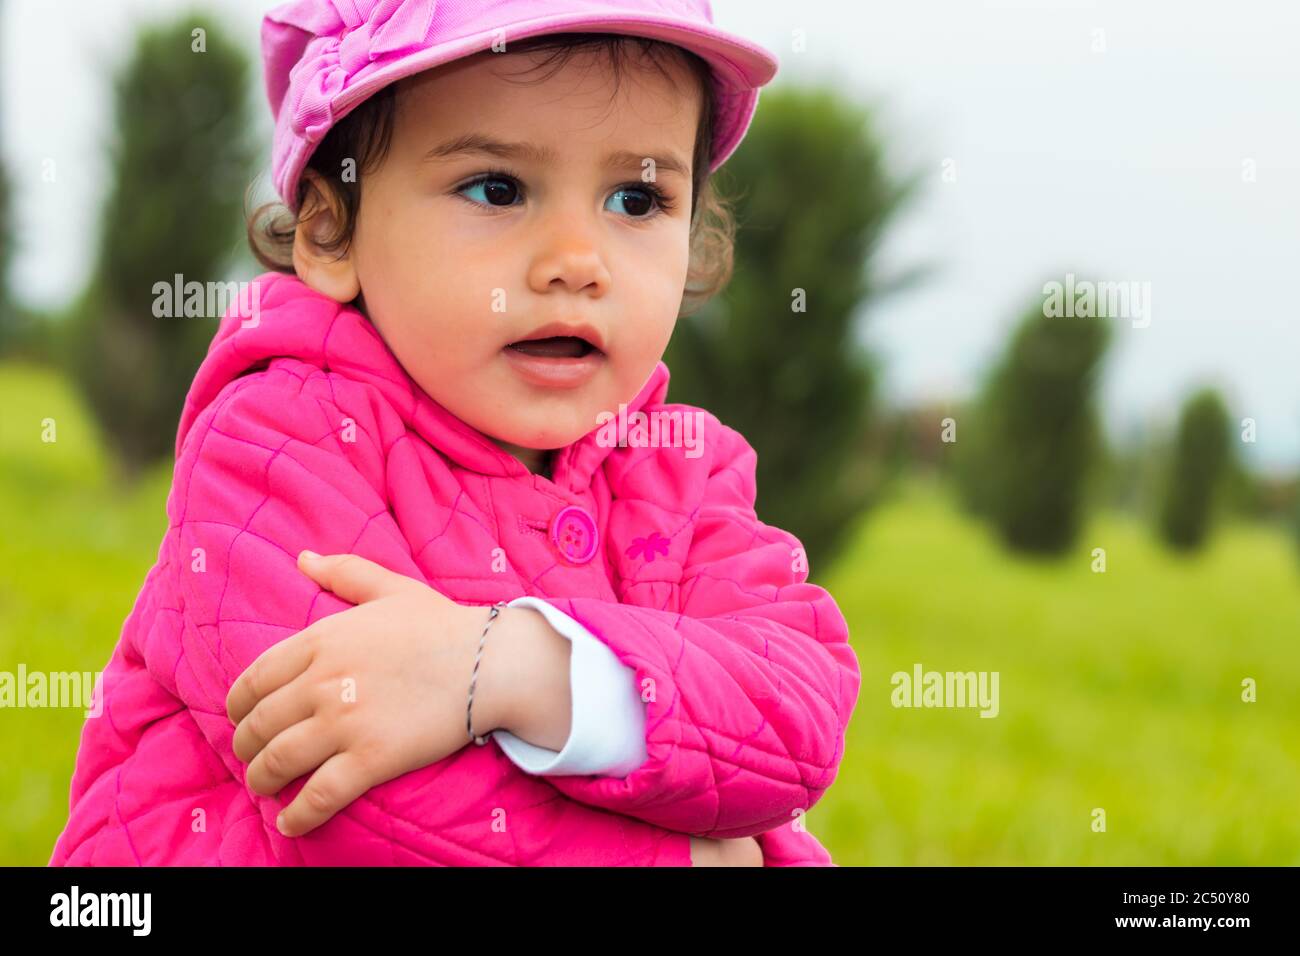 a stubborn 2-year-old girl embracing herself in a park on an overcast day Stock Photo